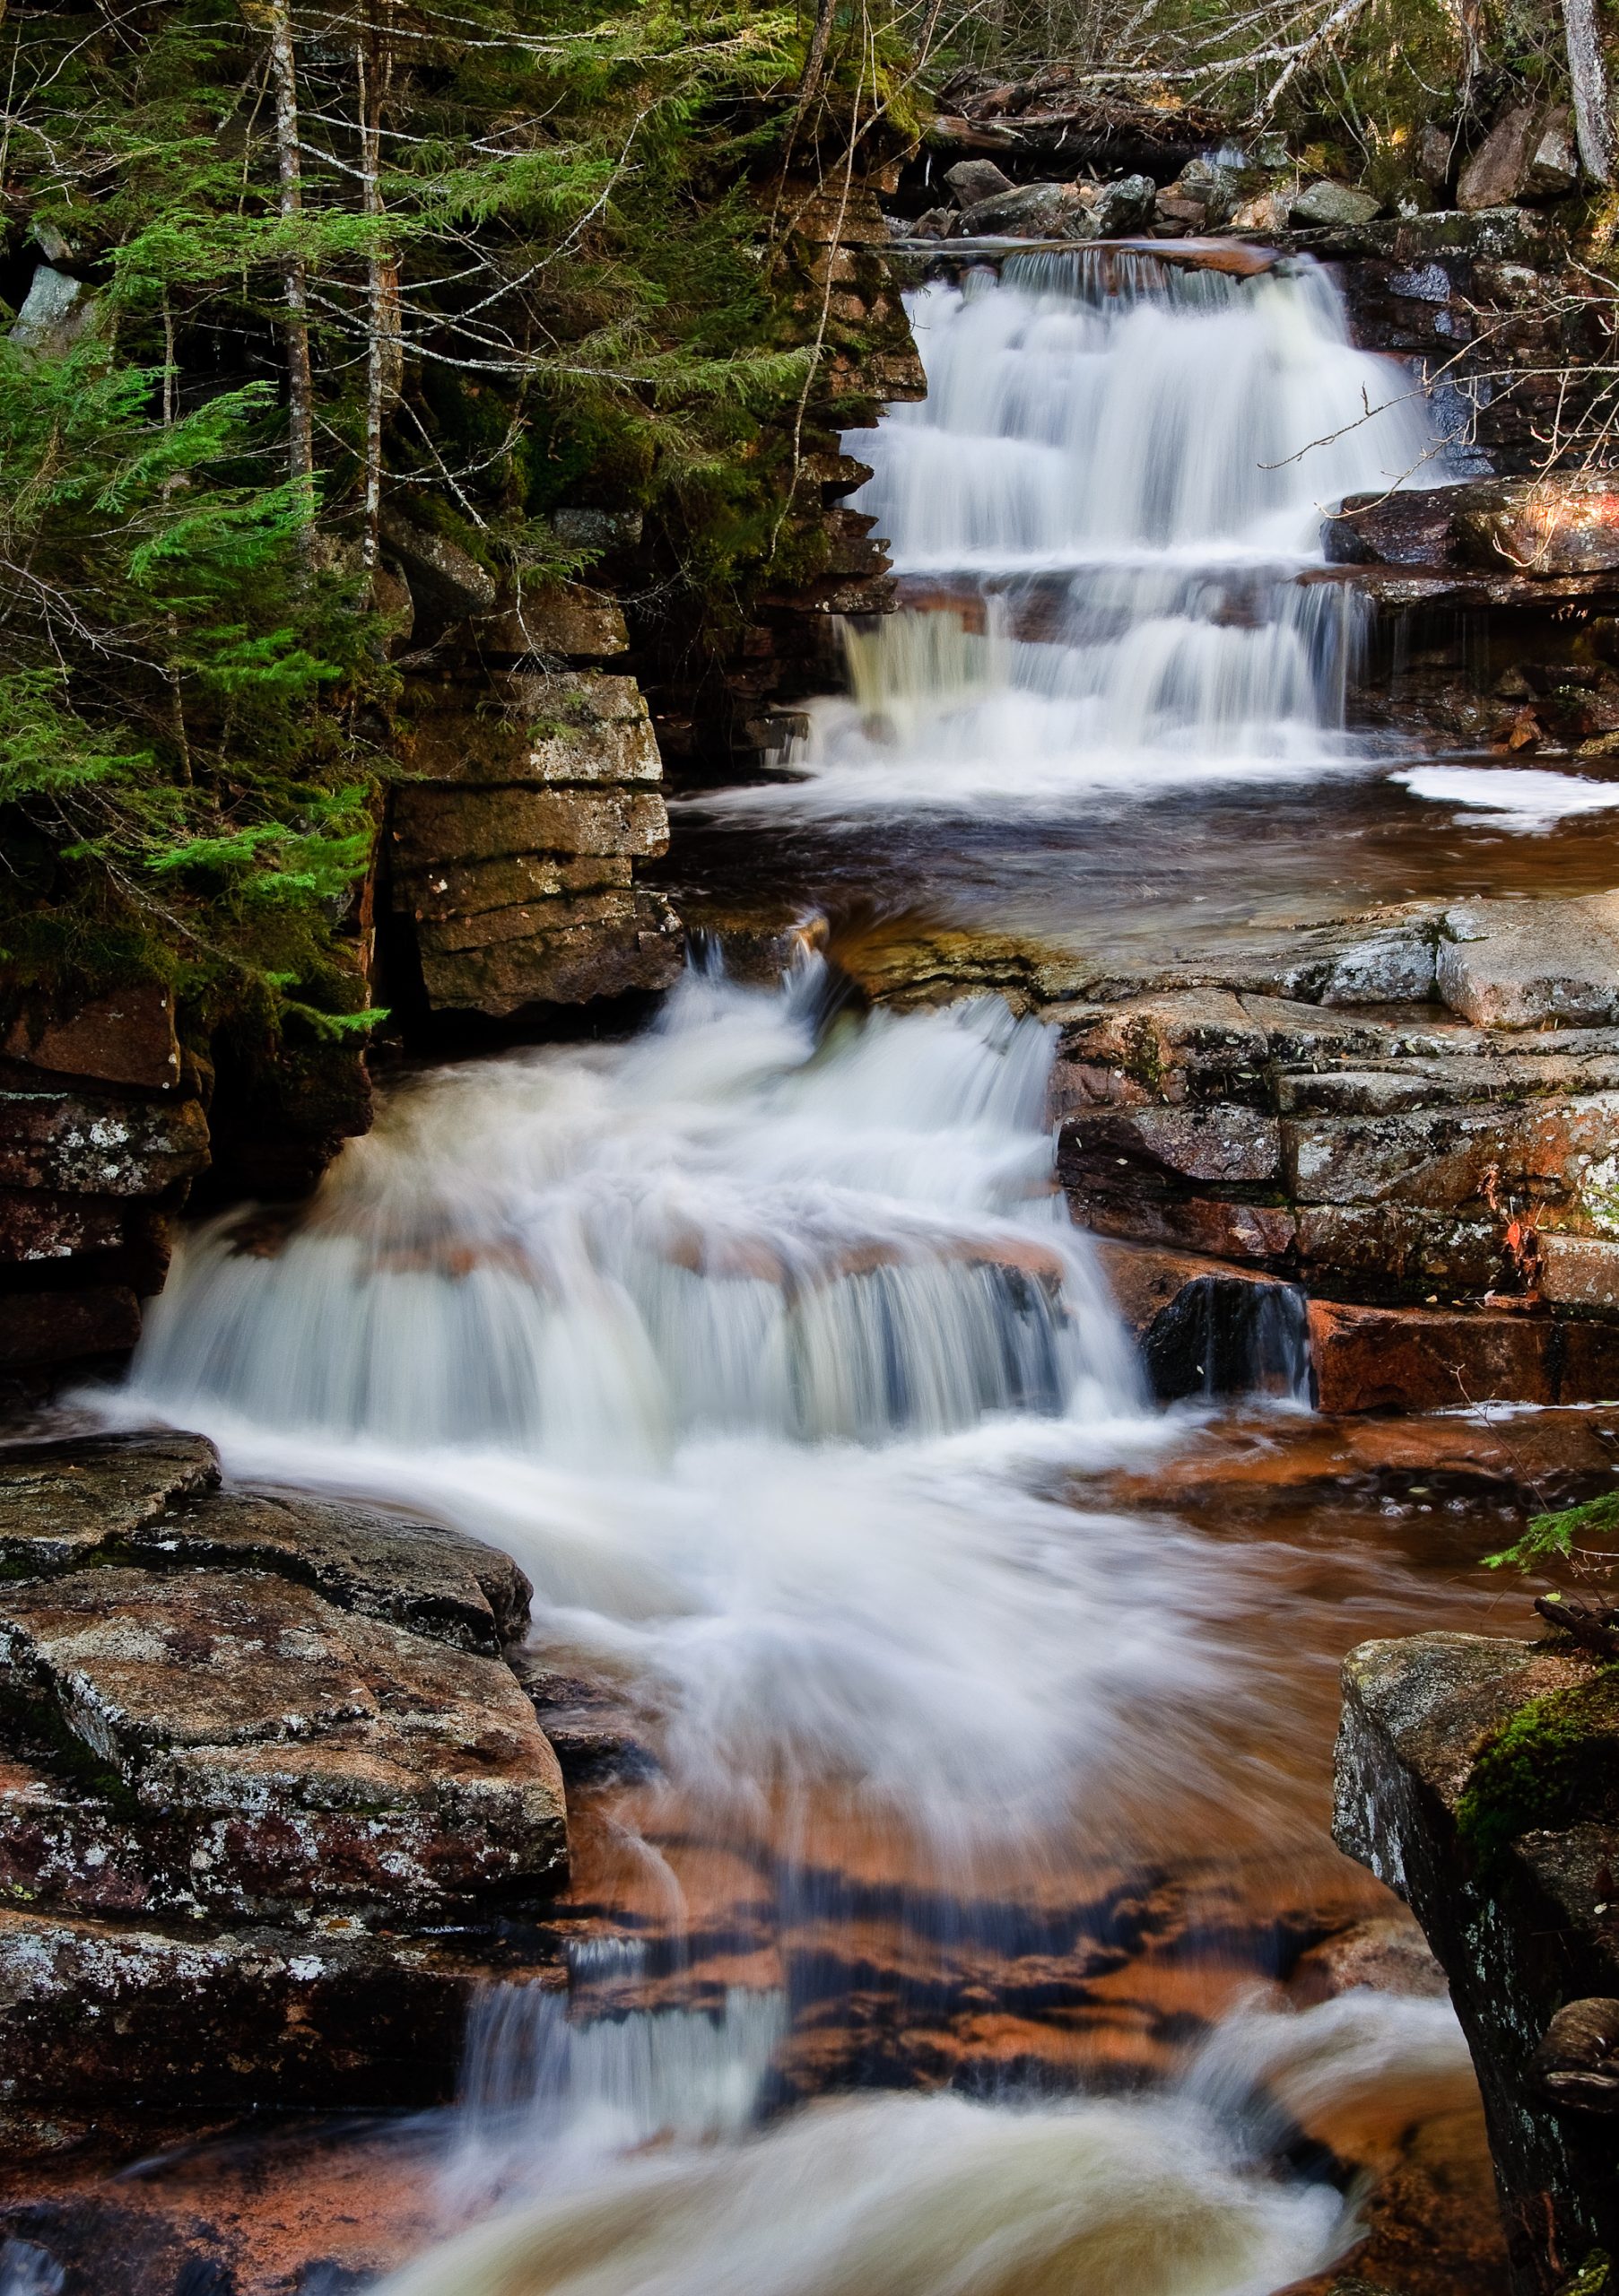 Arethusa Falls (user submitted)